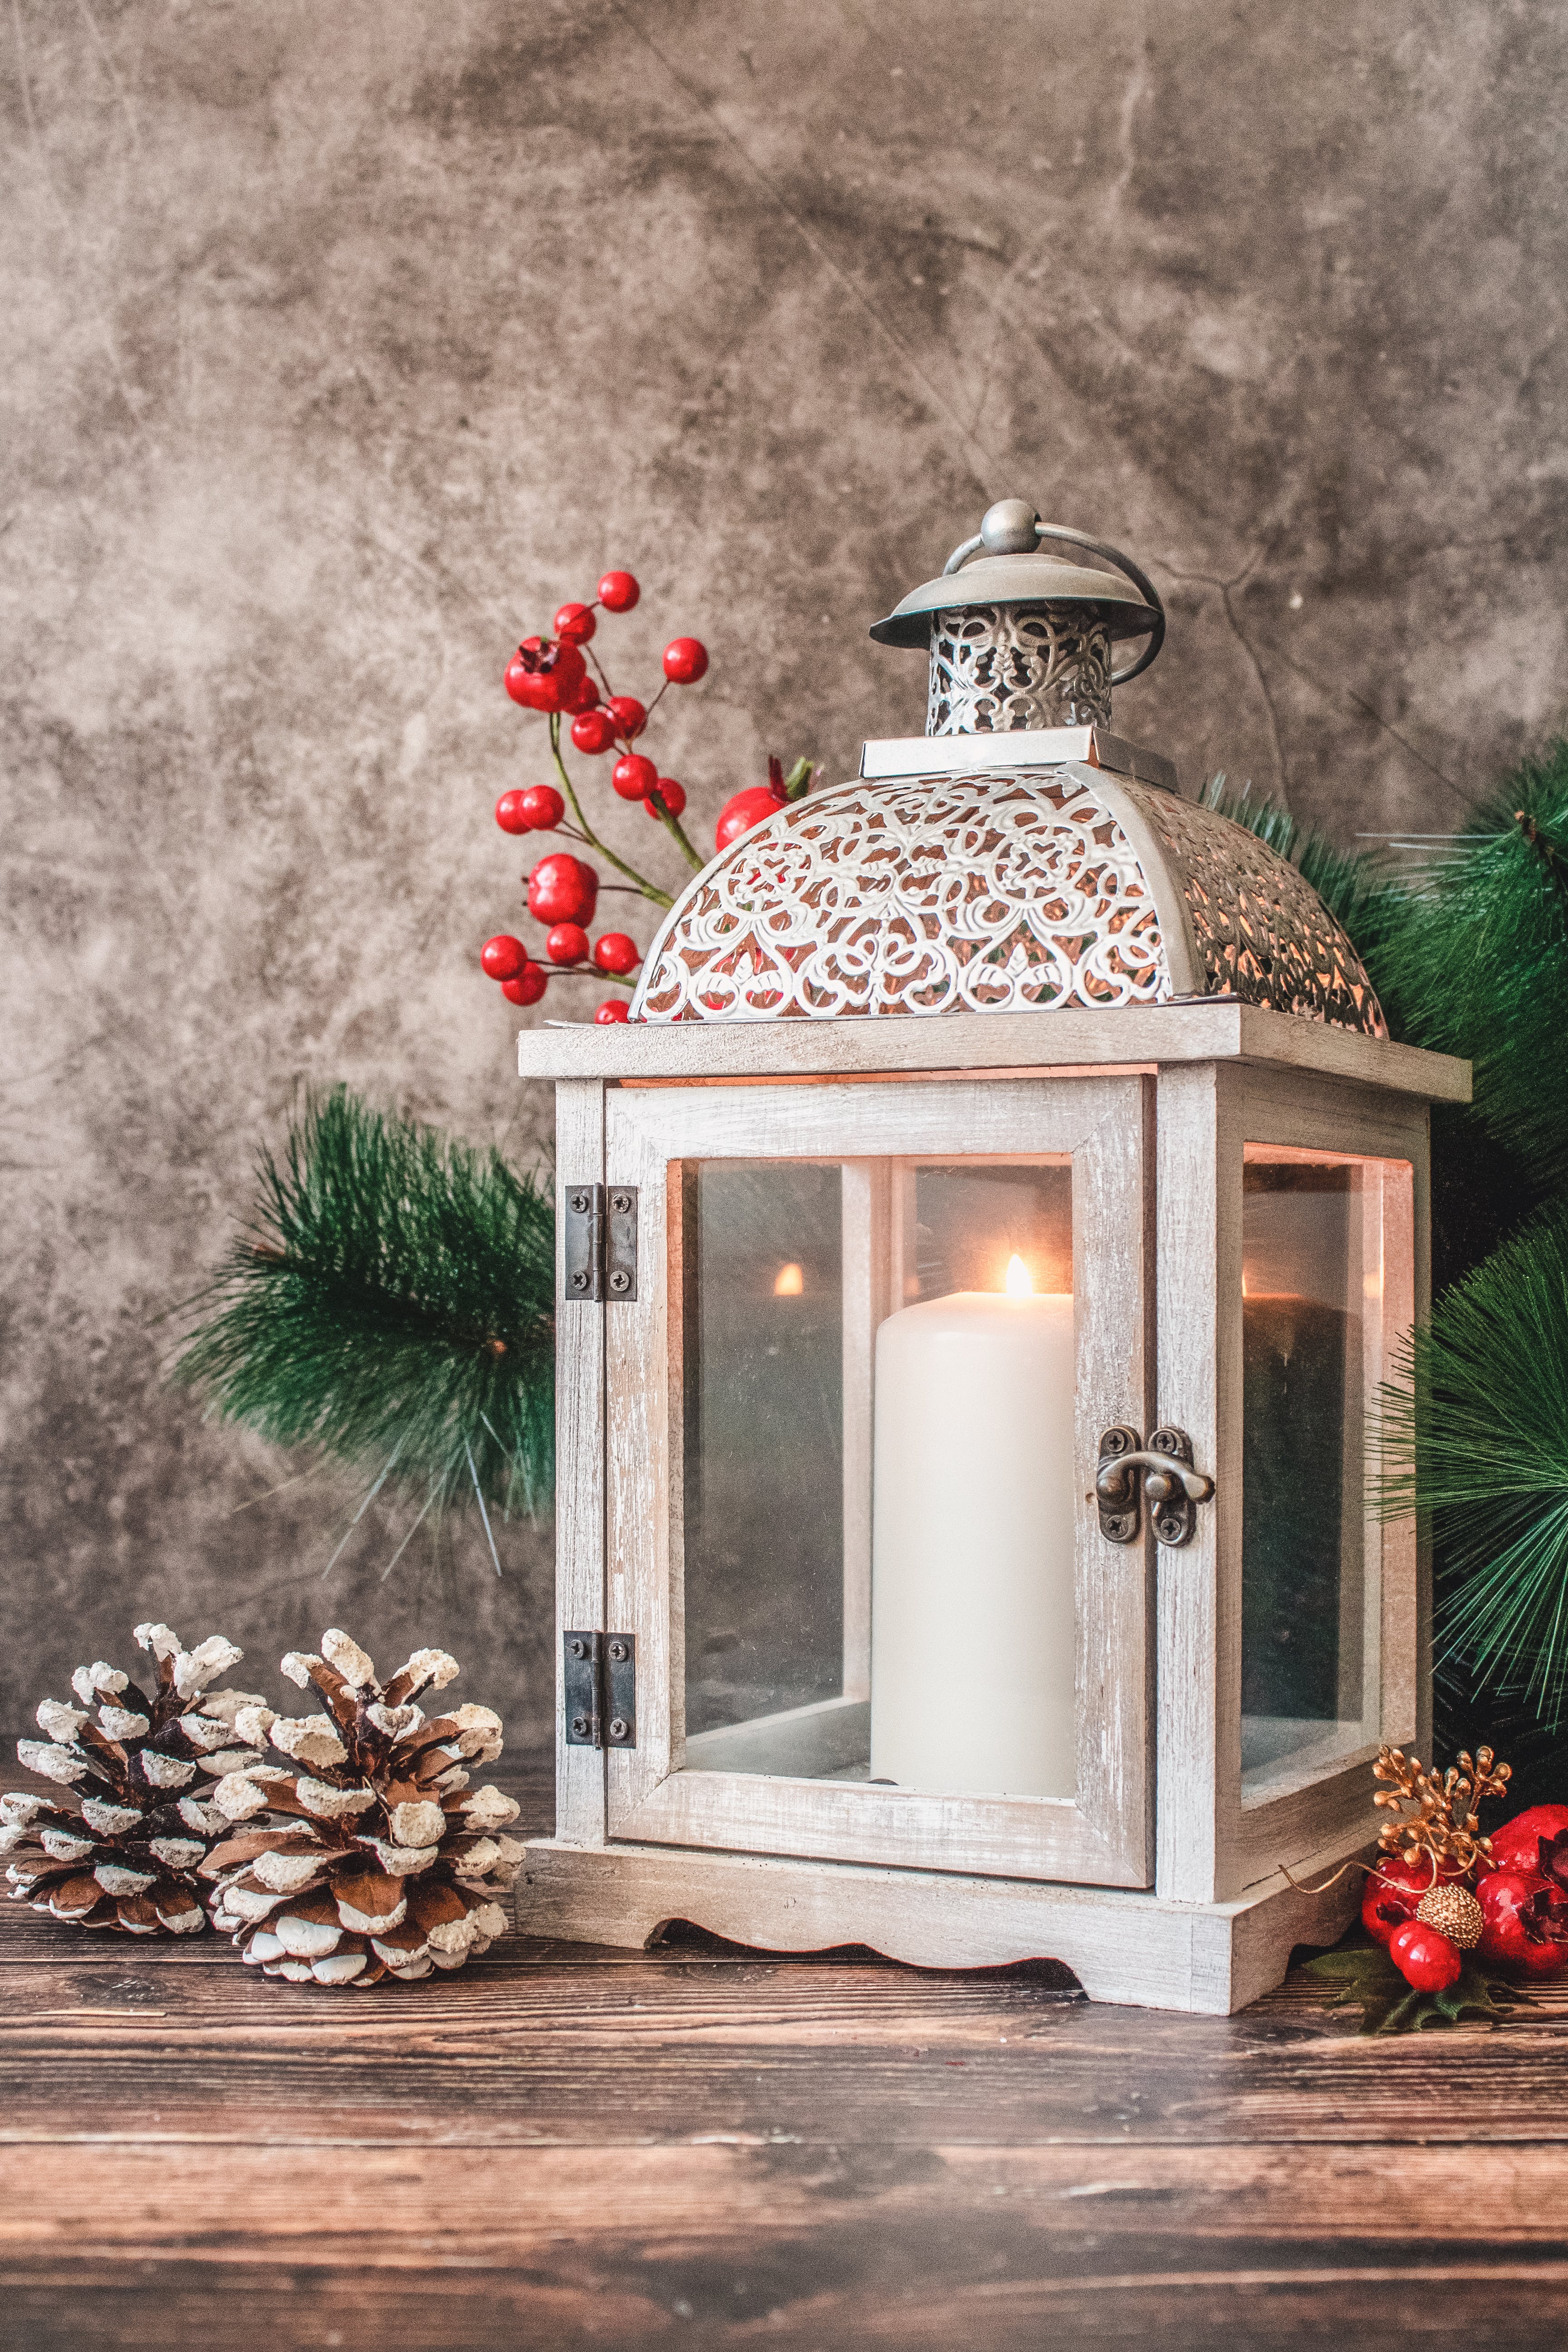 Decorative Christmas lantern with candle inside